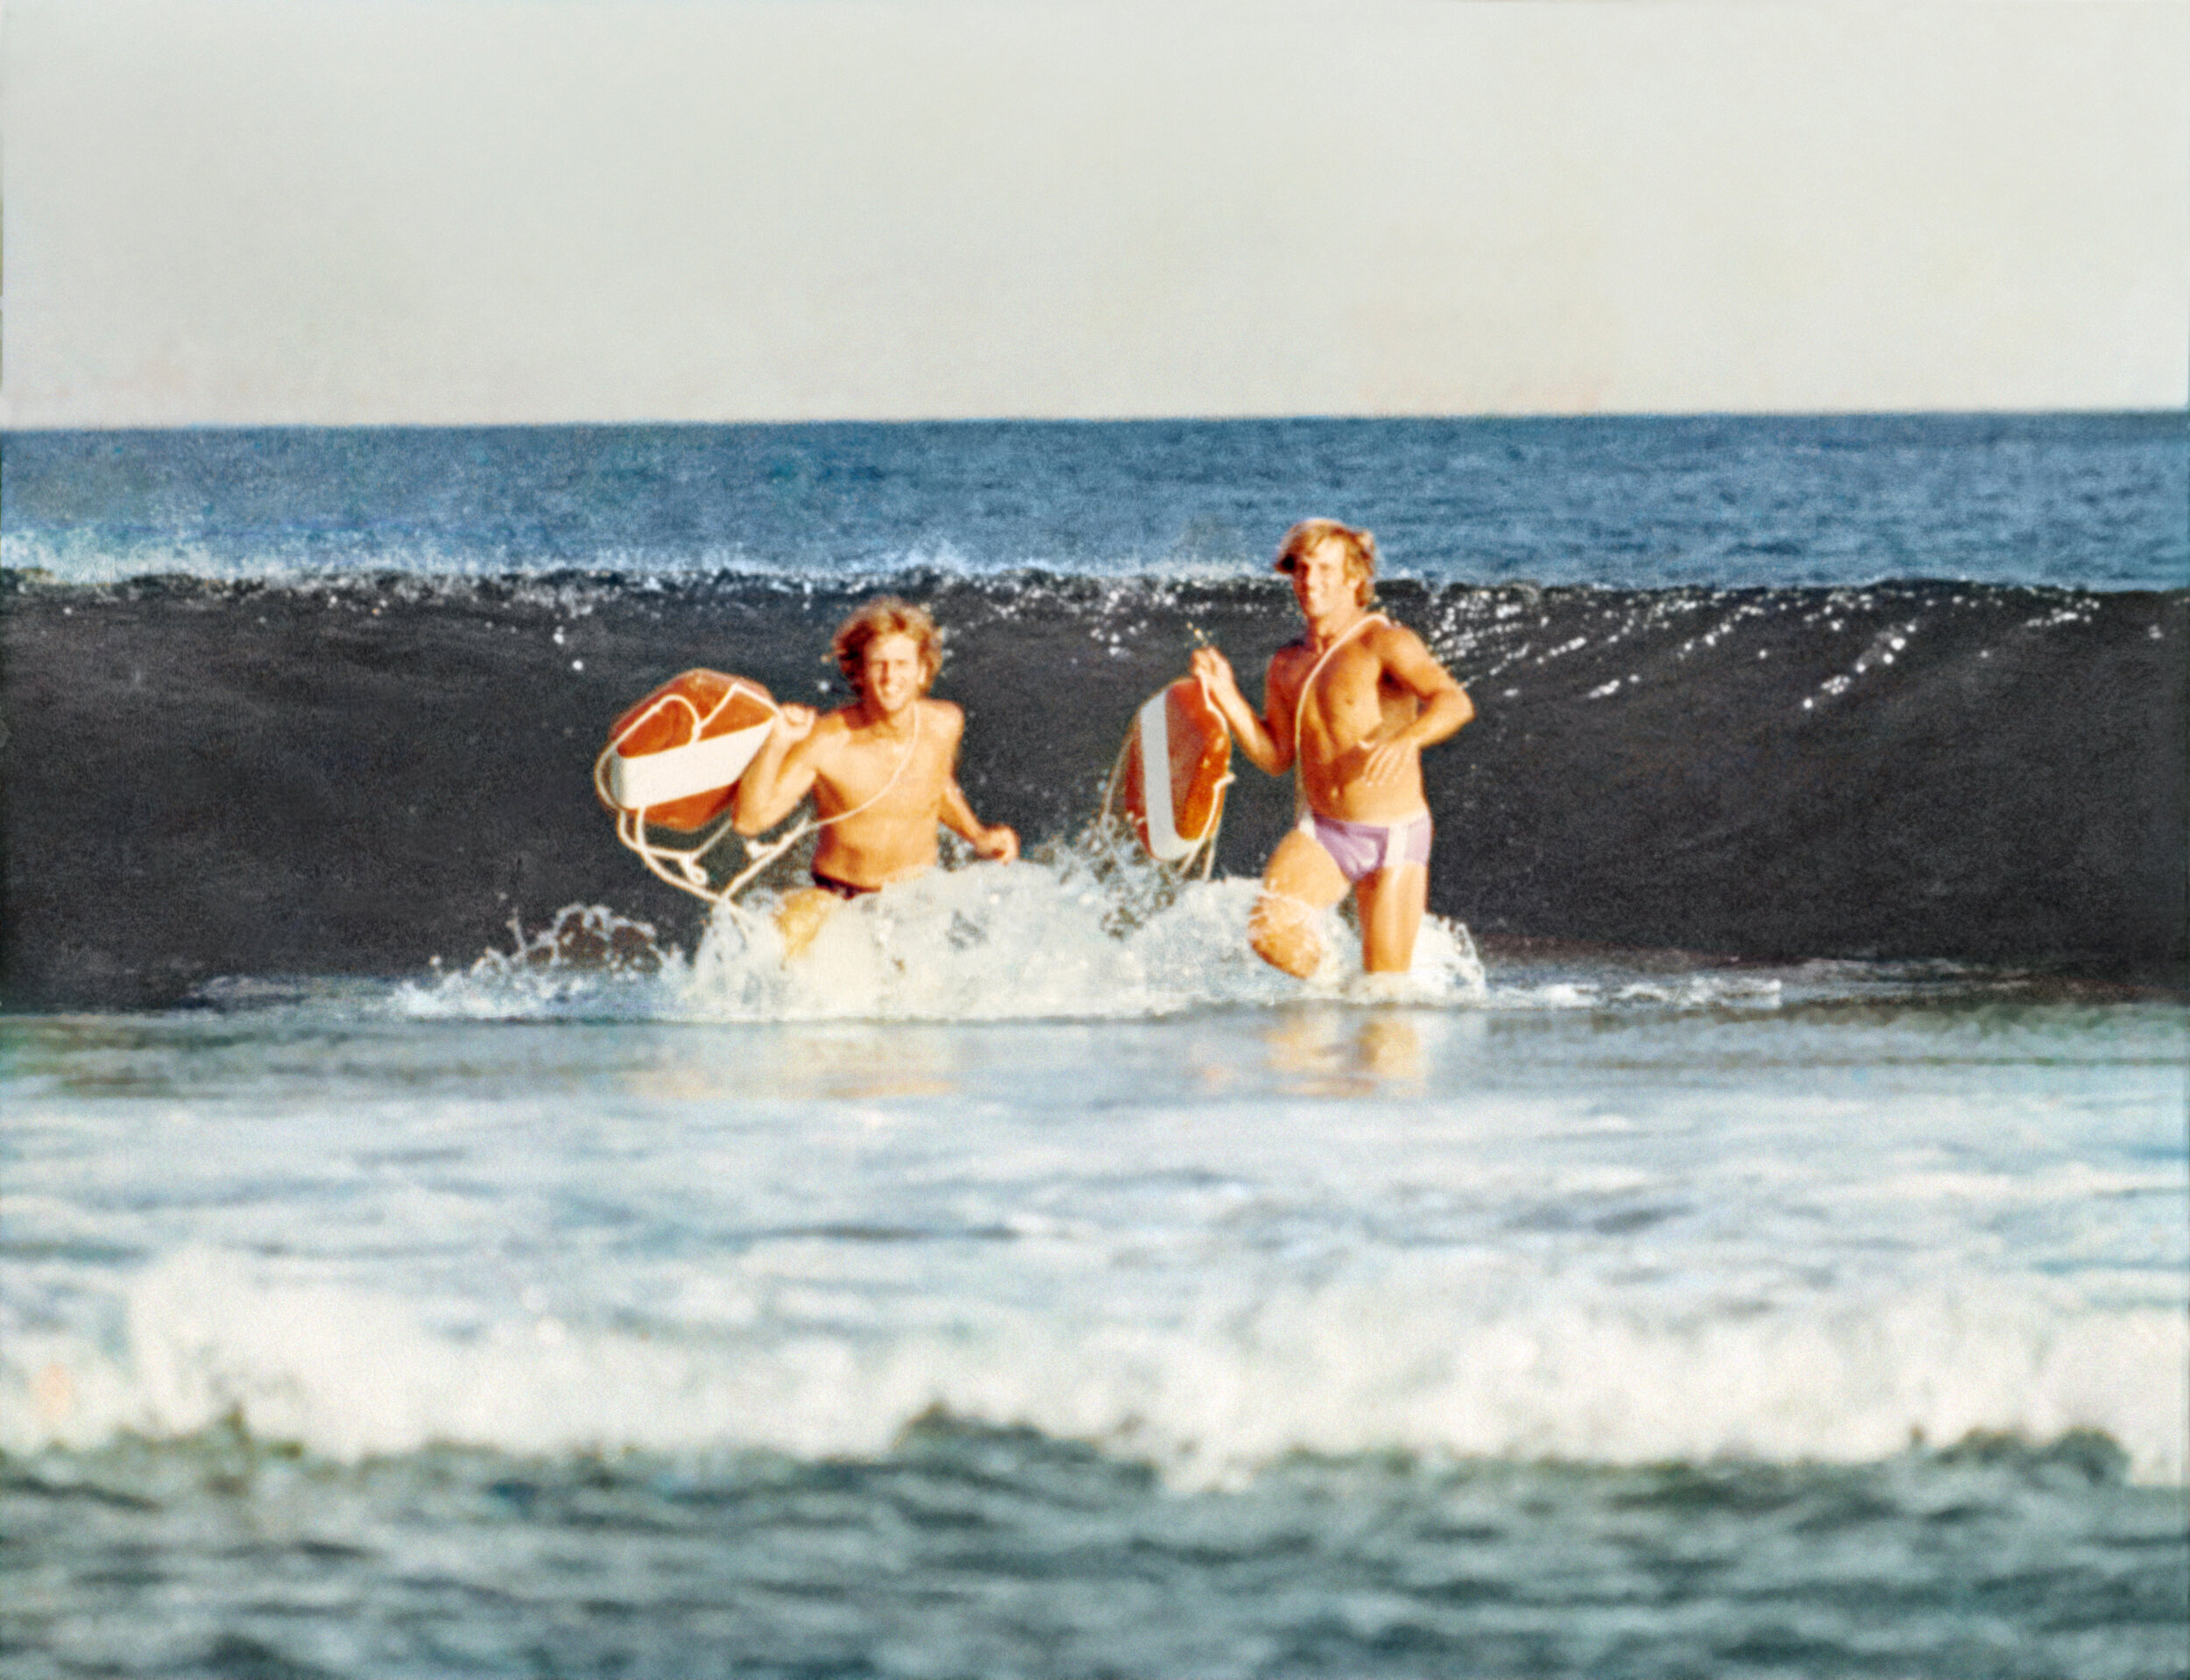 Rescue cans were a lot larger in 1972 when Mike Smith (right) was running out of the surf with Ricky Pons.